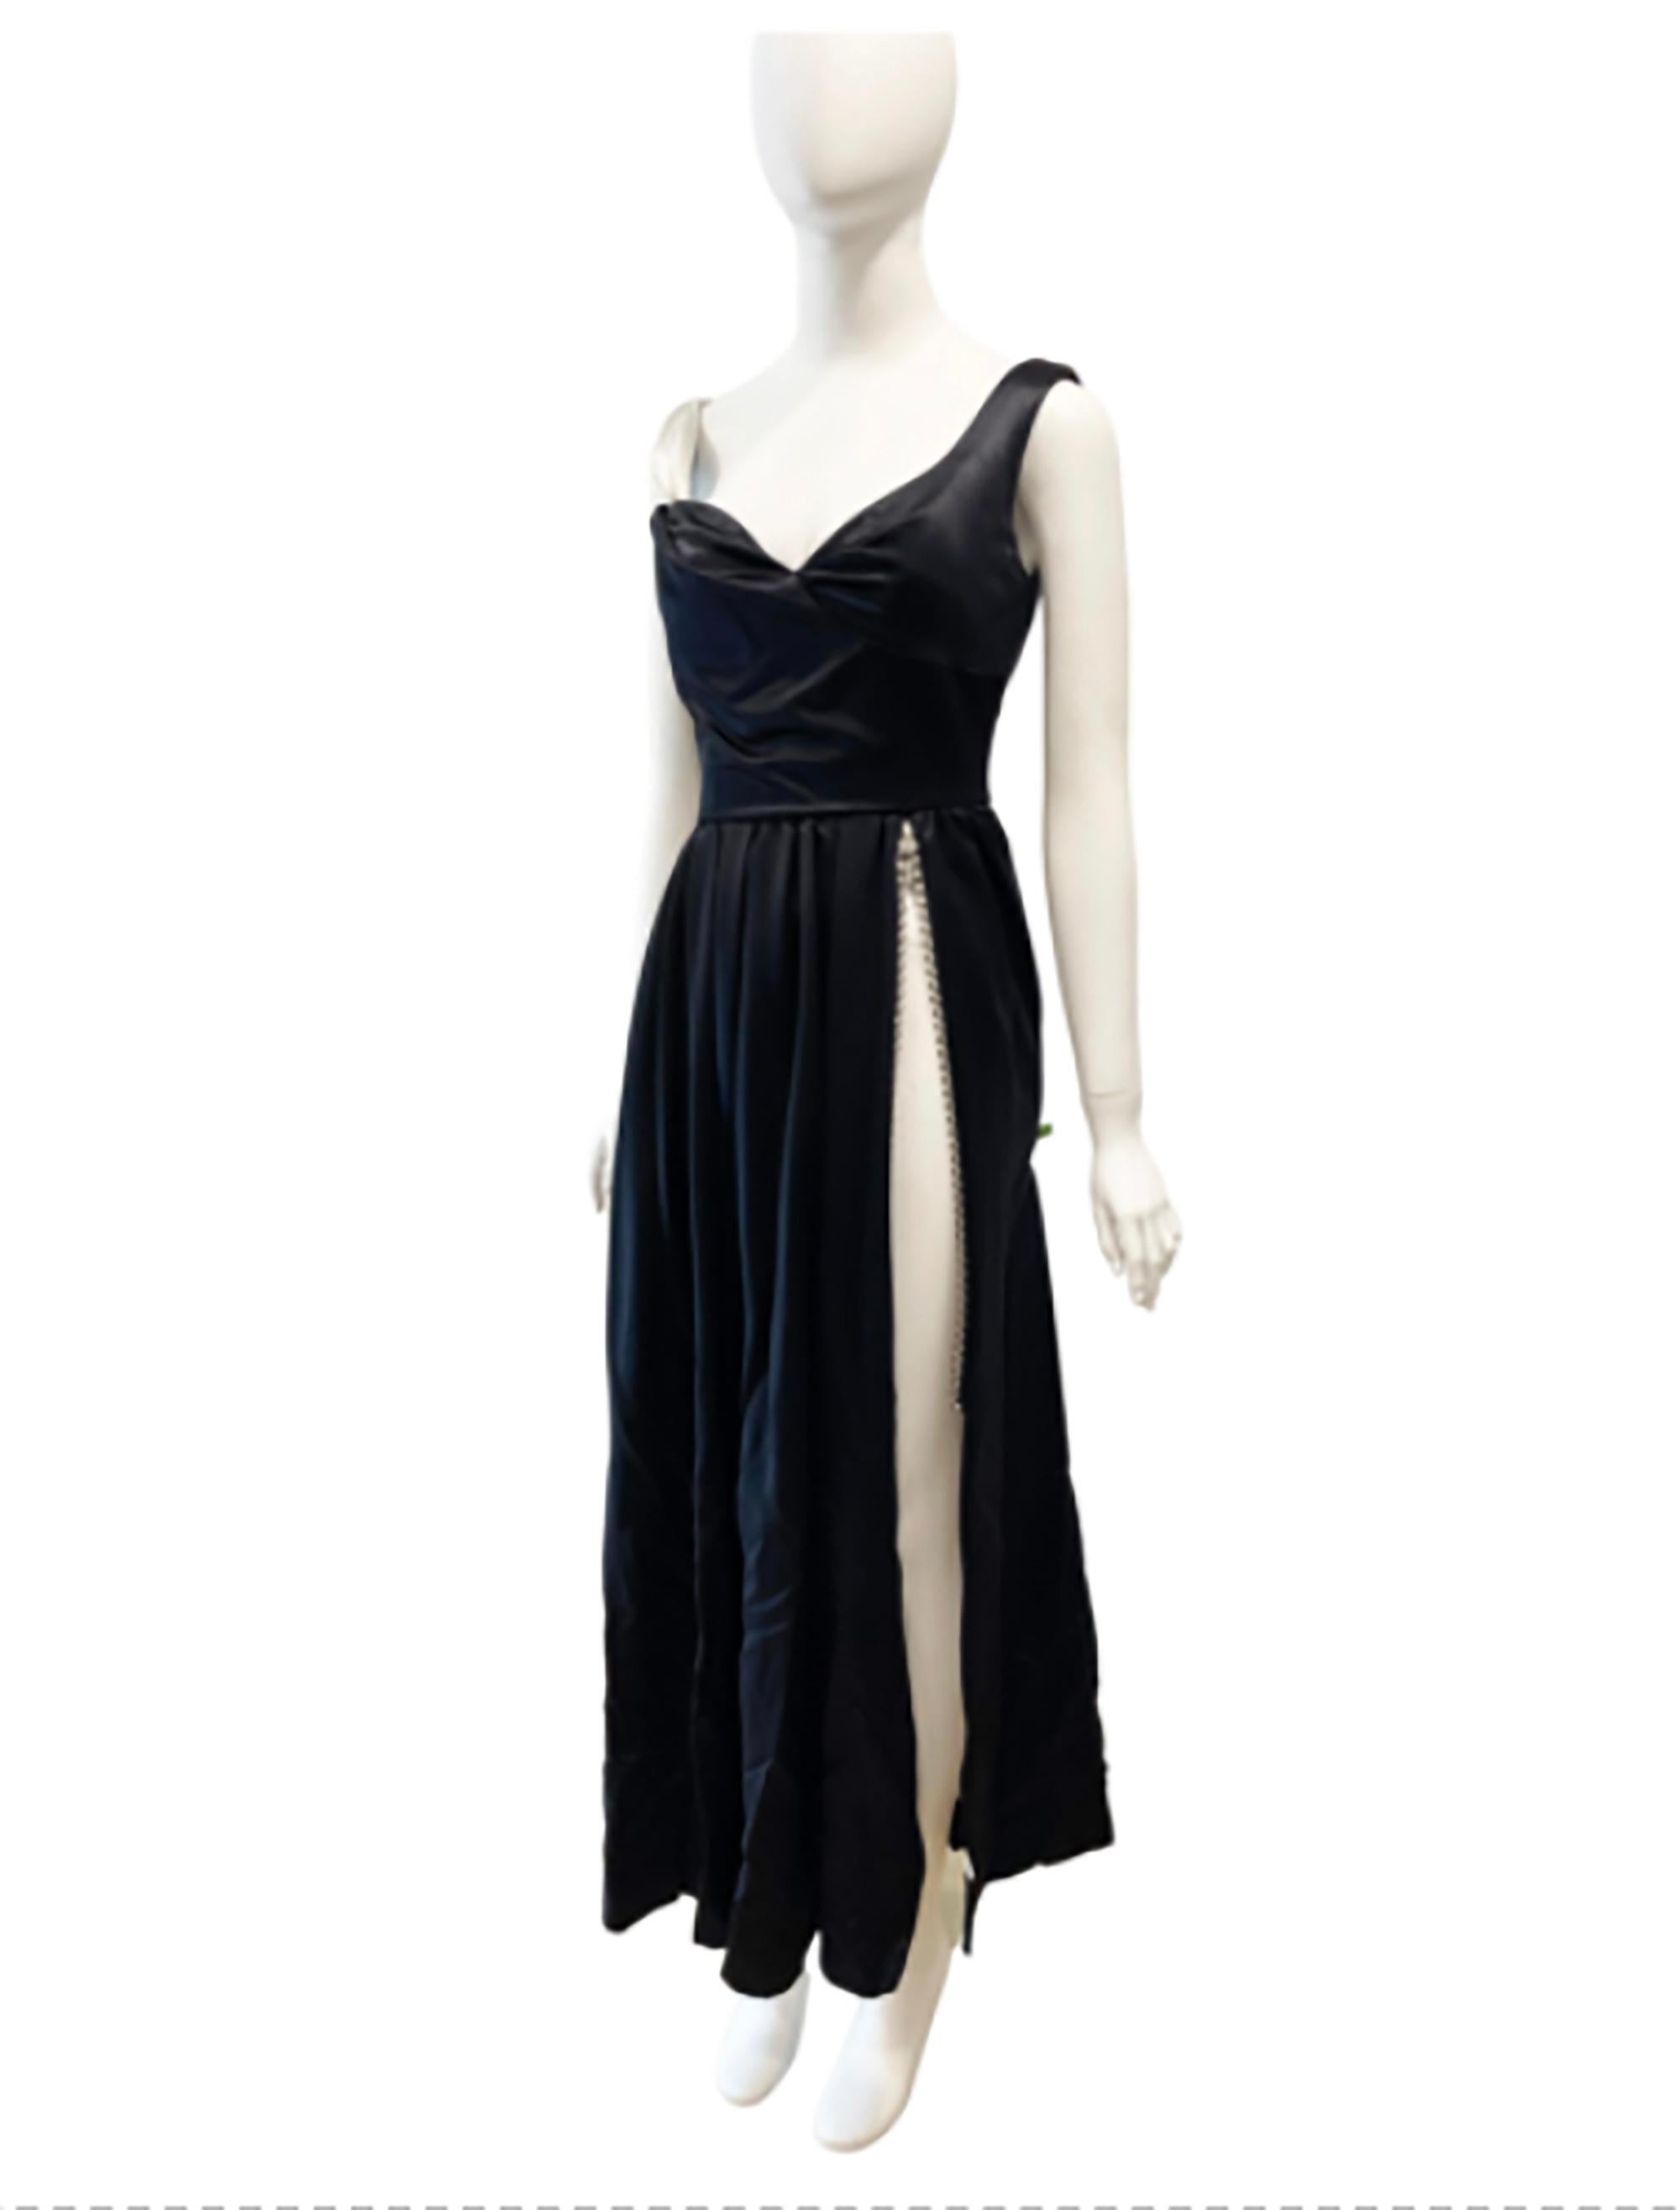 Black Christian Lacroix satin gown with crystal zipper slit